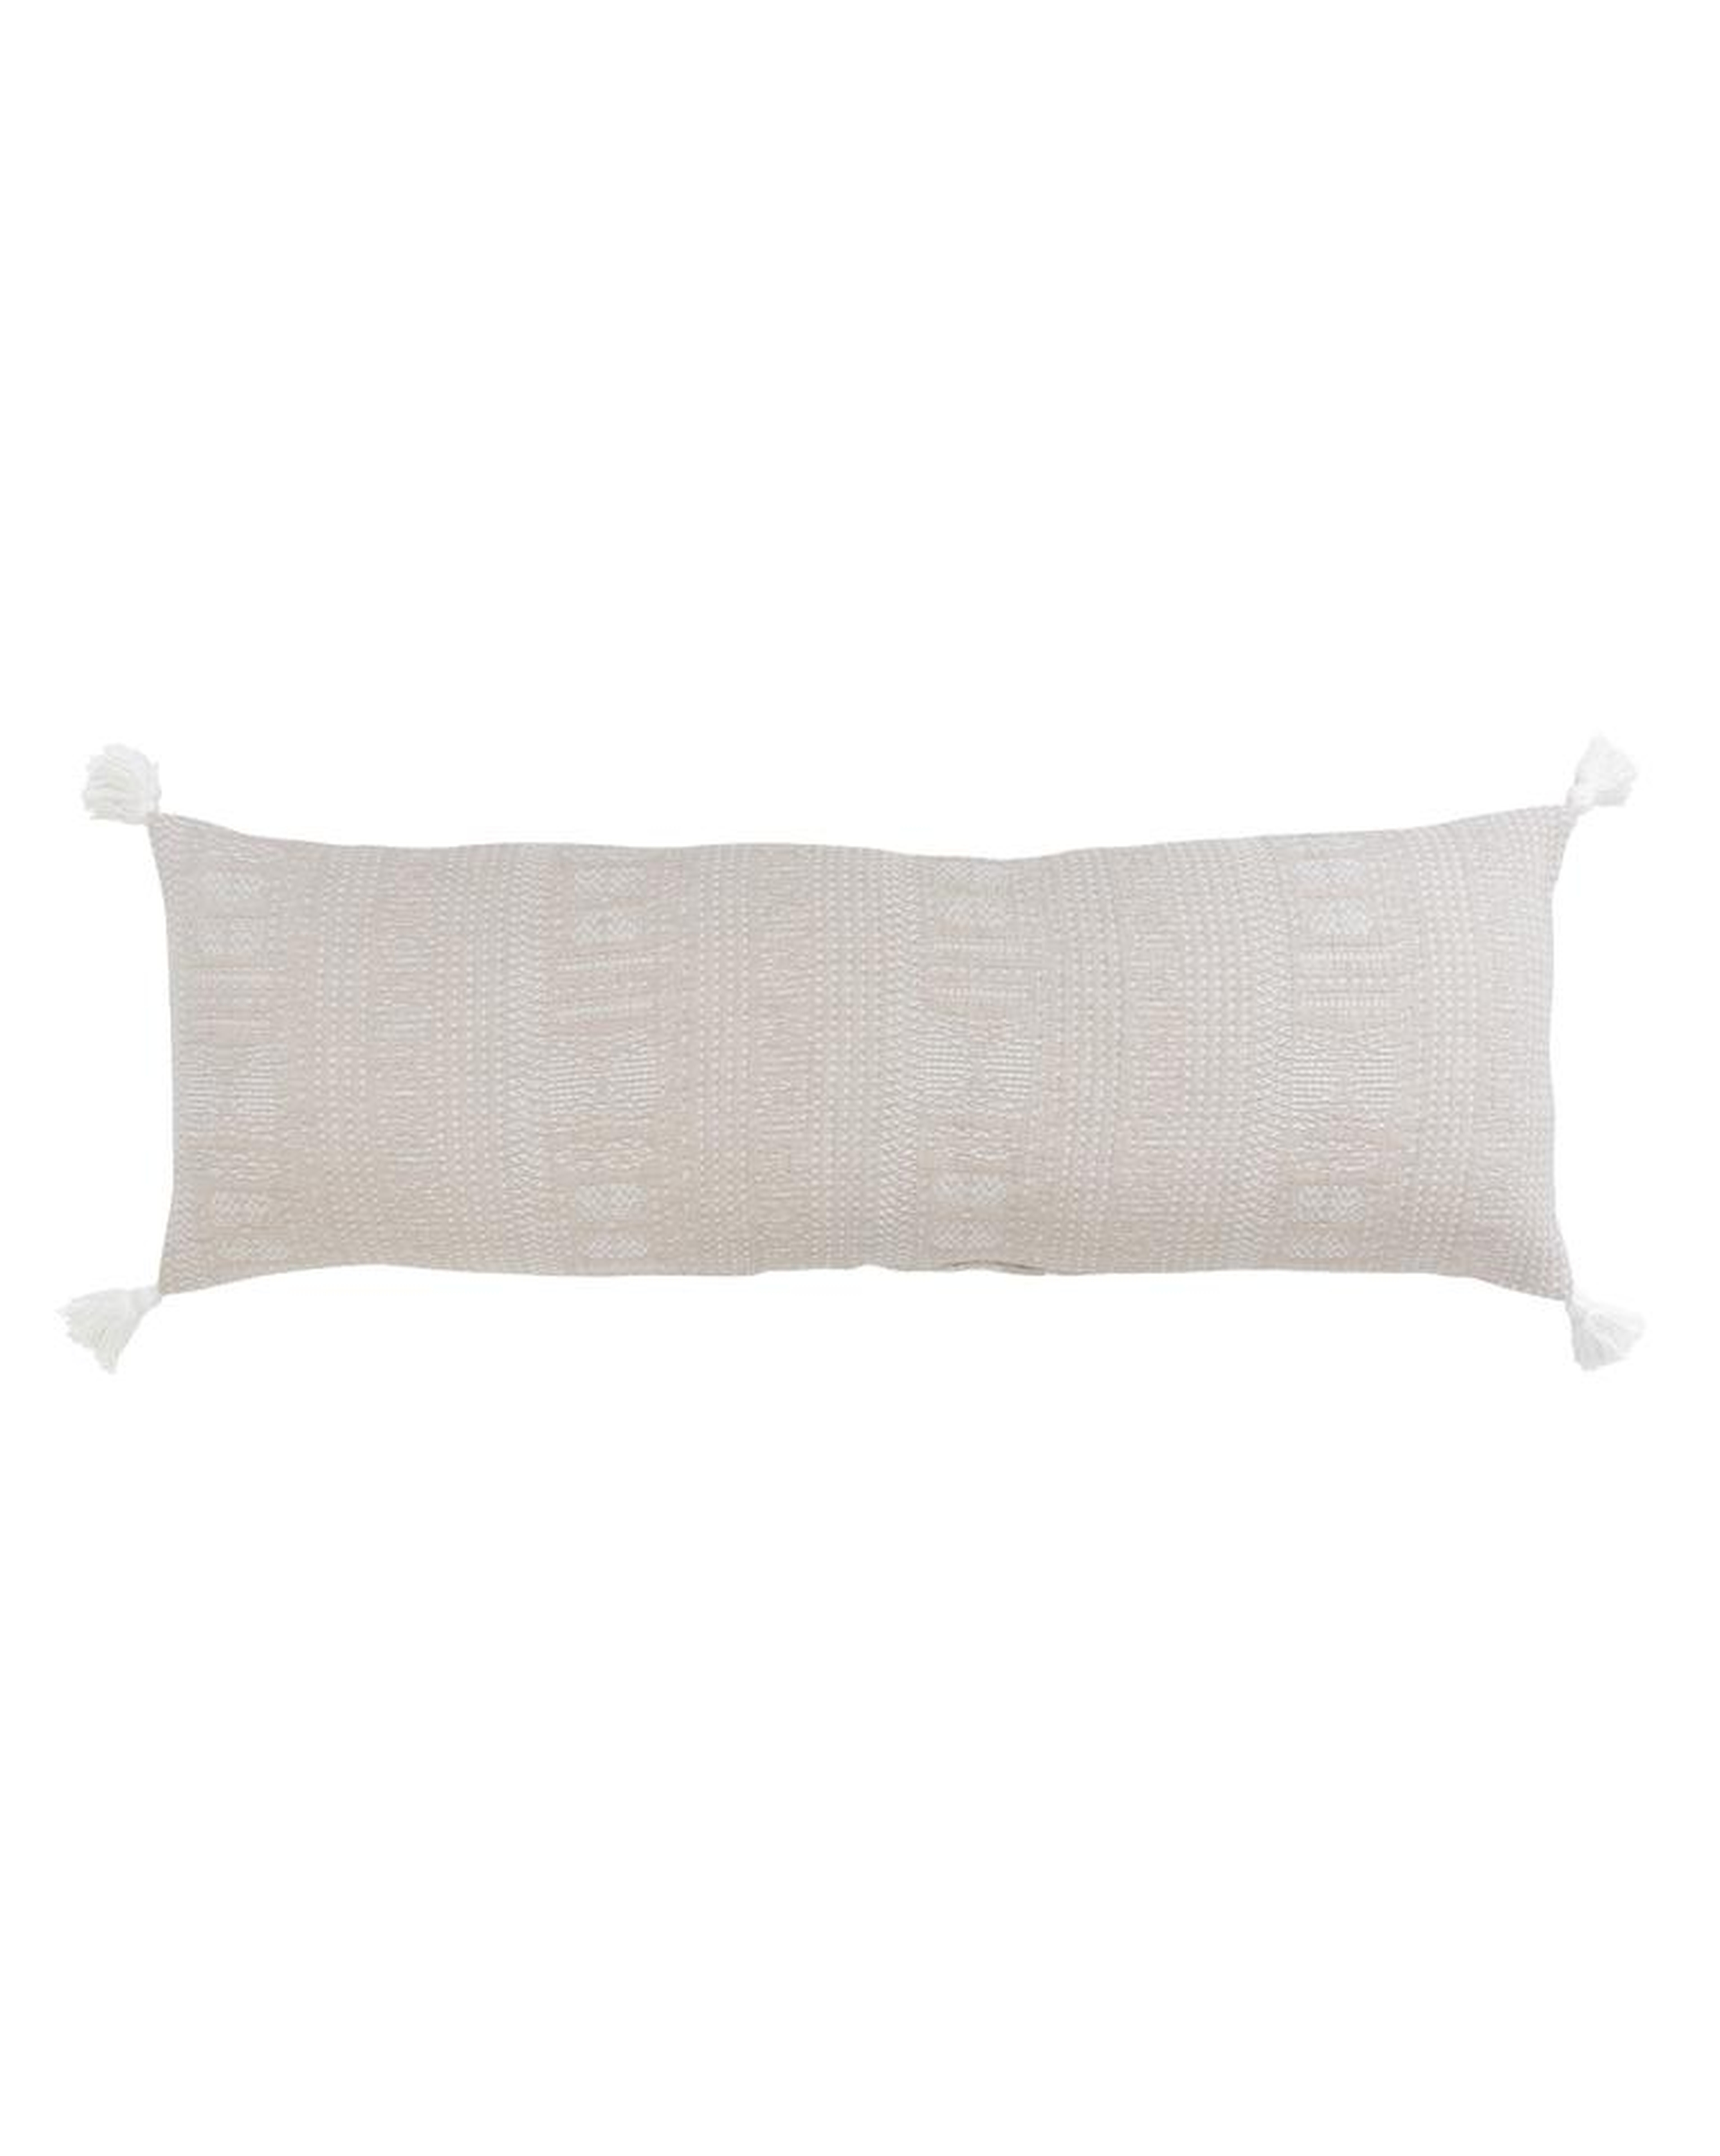 Eleanor Pillow with Down Insert - McGee & Co.